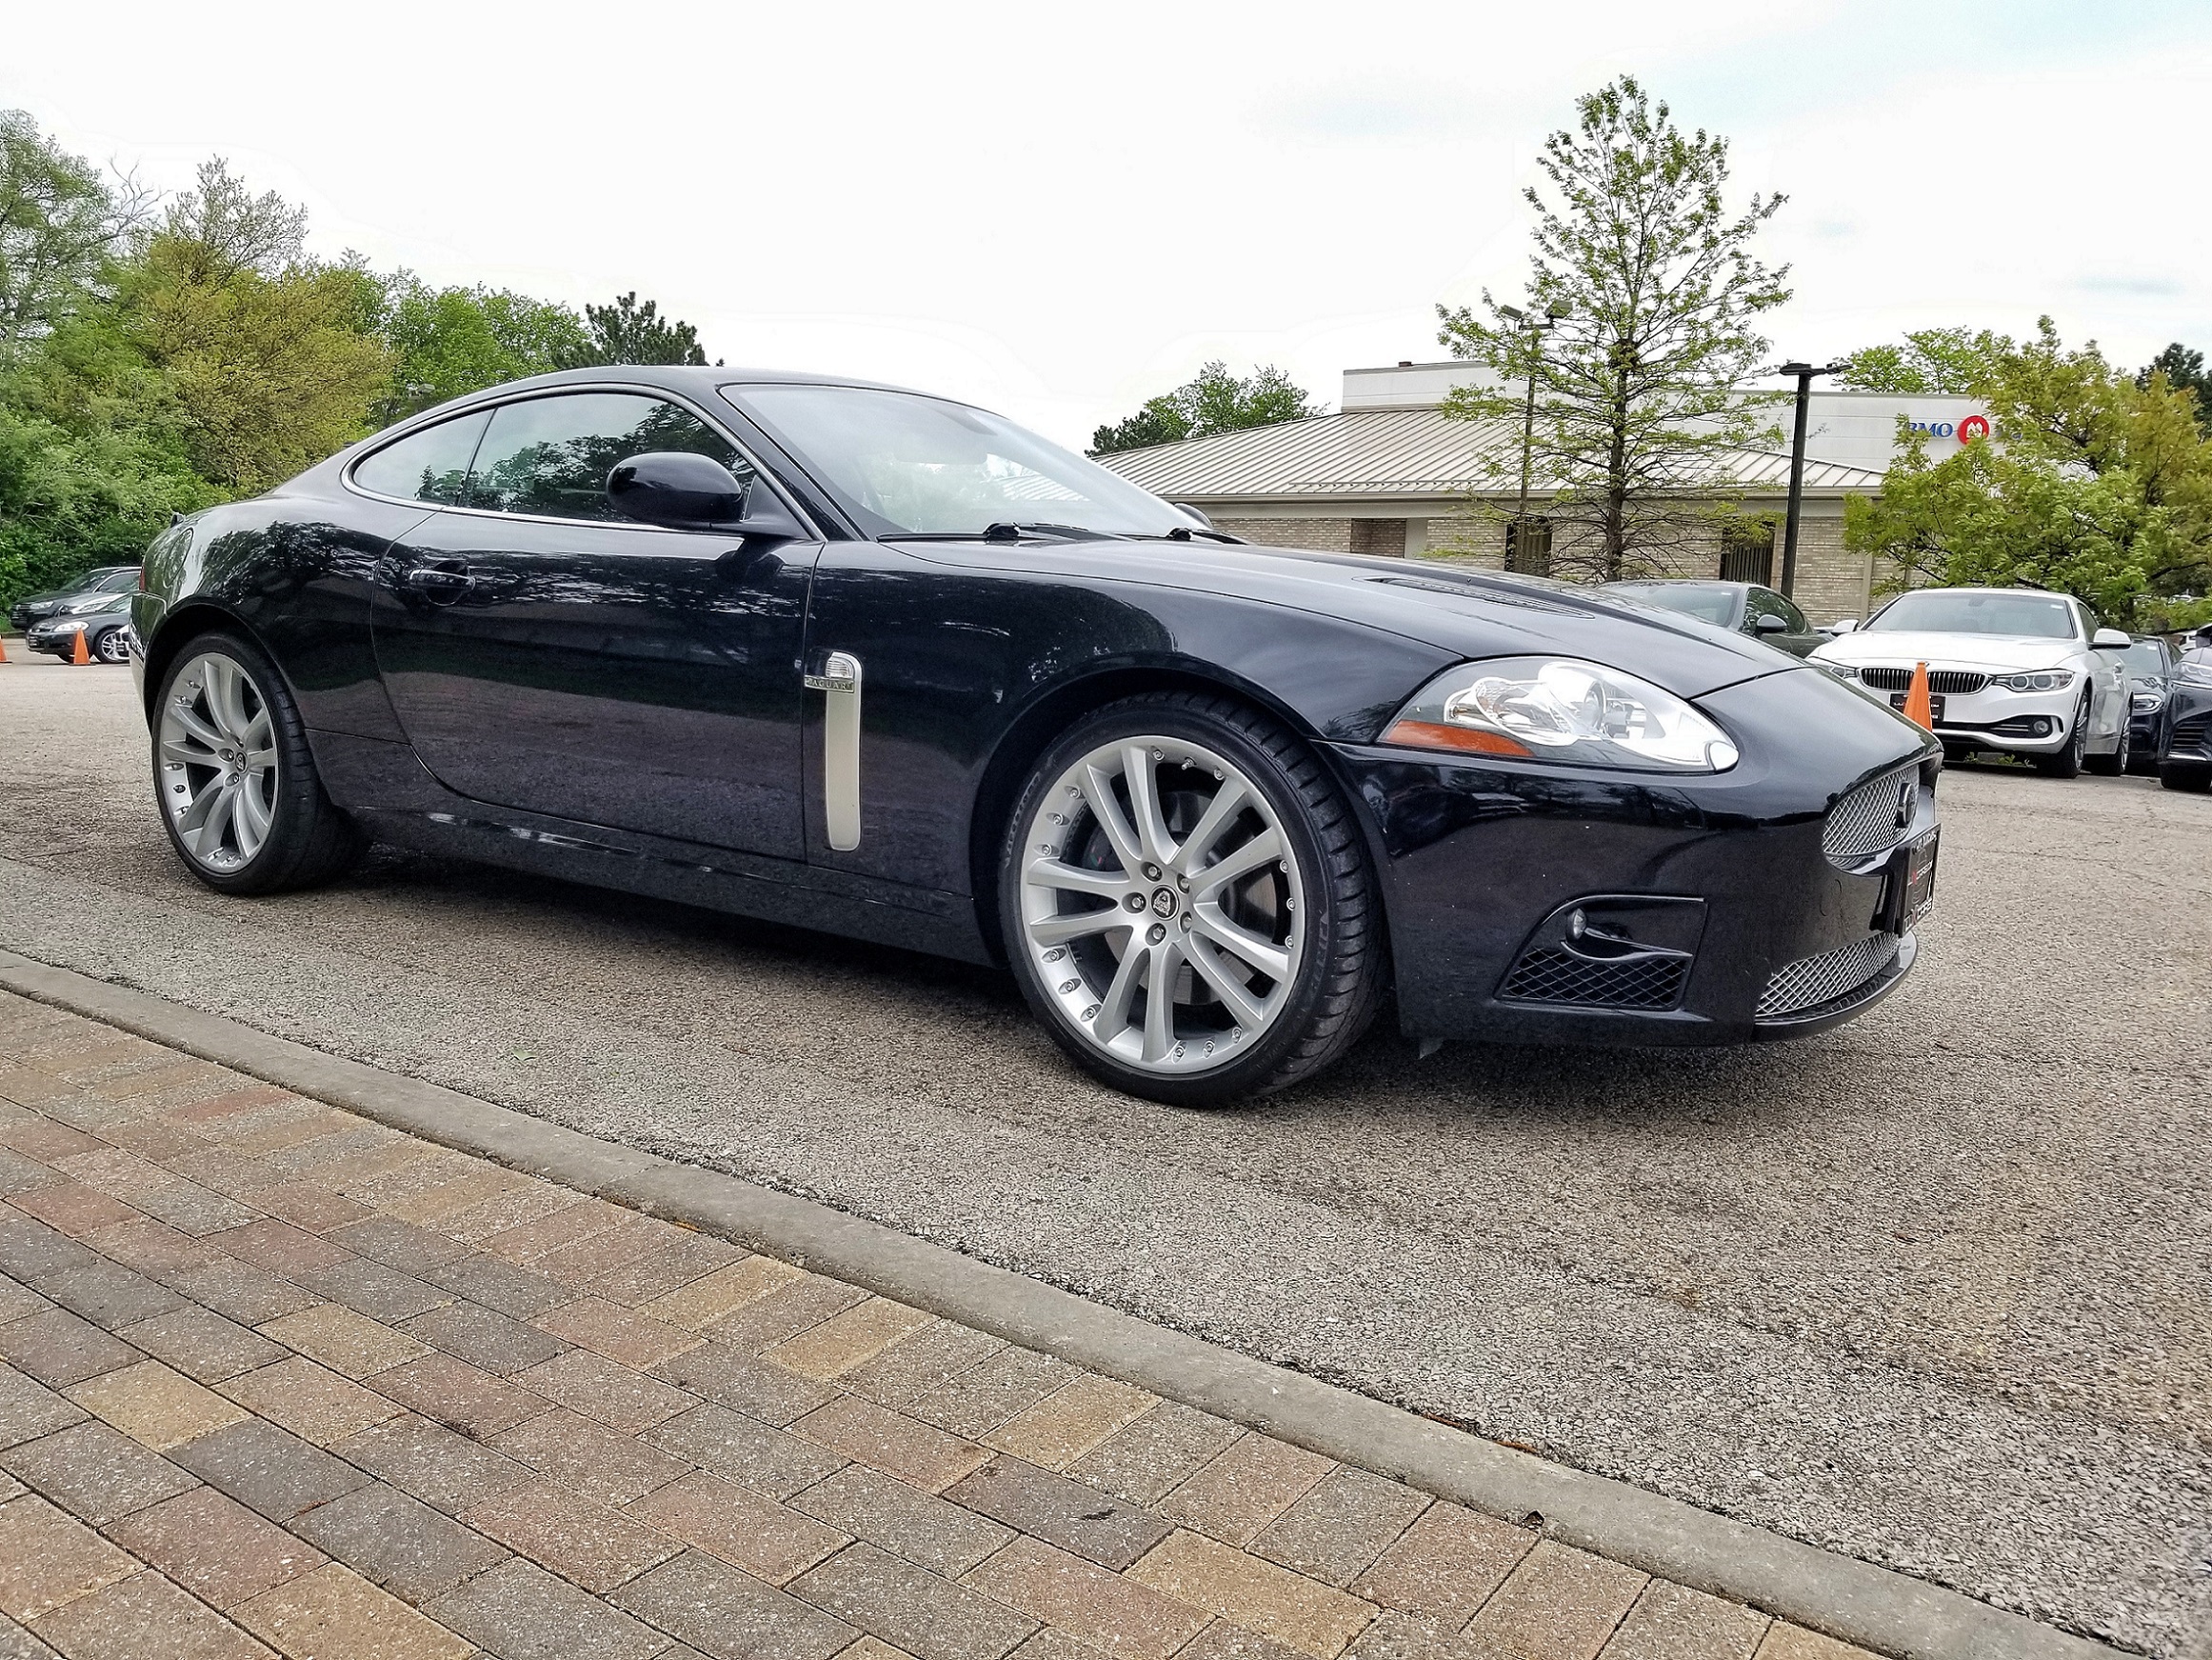 A black used 2007 Jaguar XKR Coupe in a used car dealership parking lot about to head to a pre-purchase inspection